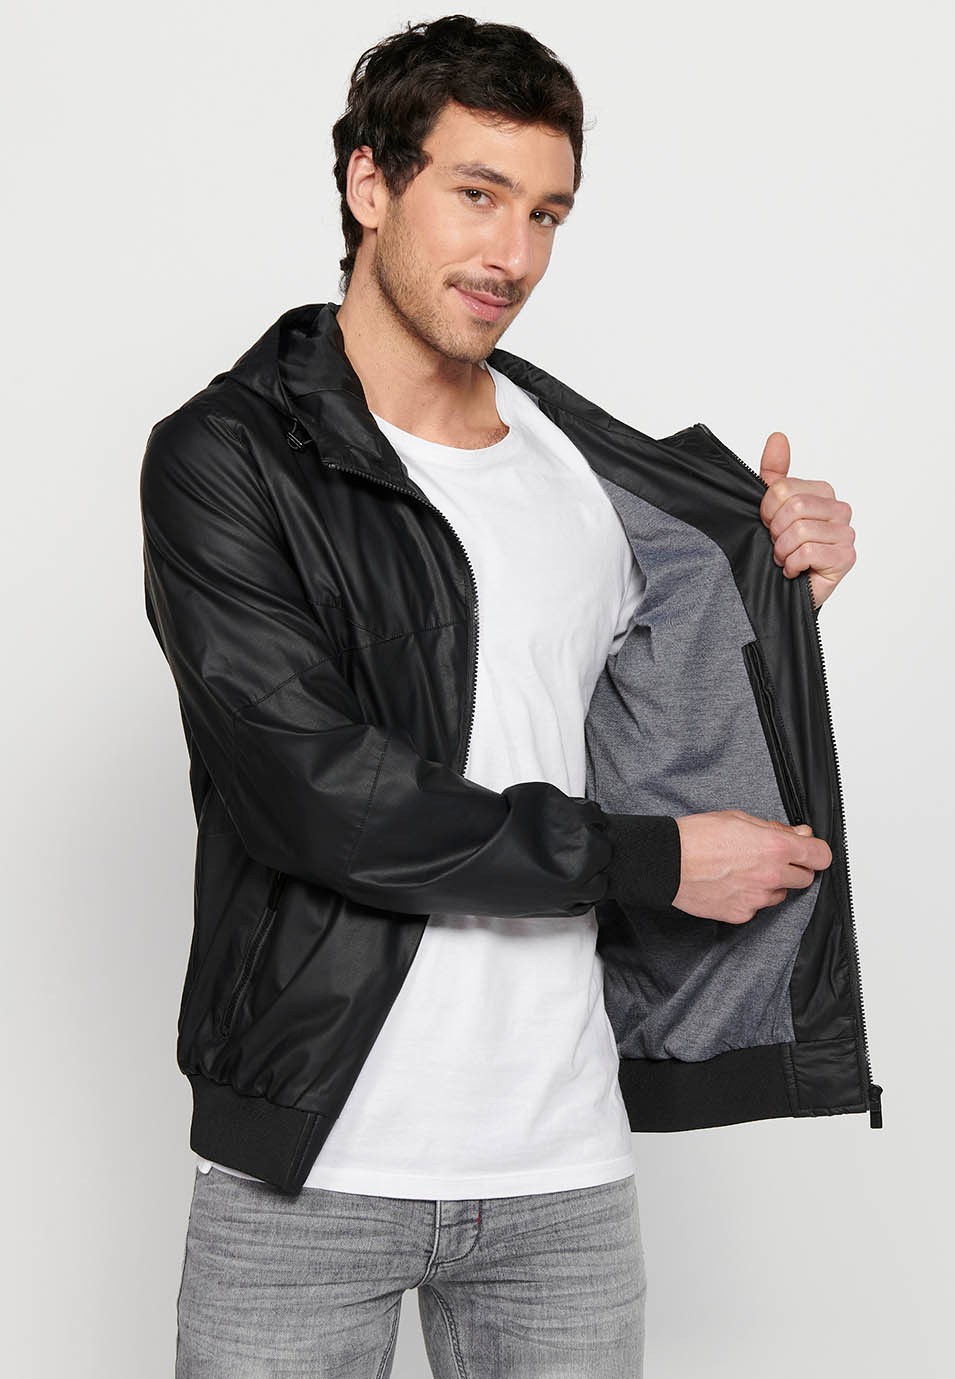 Leather-effect jacket with front zipper closure and hooded collar in black for Men 9